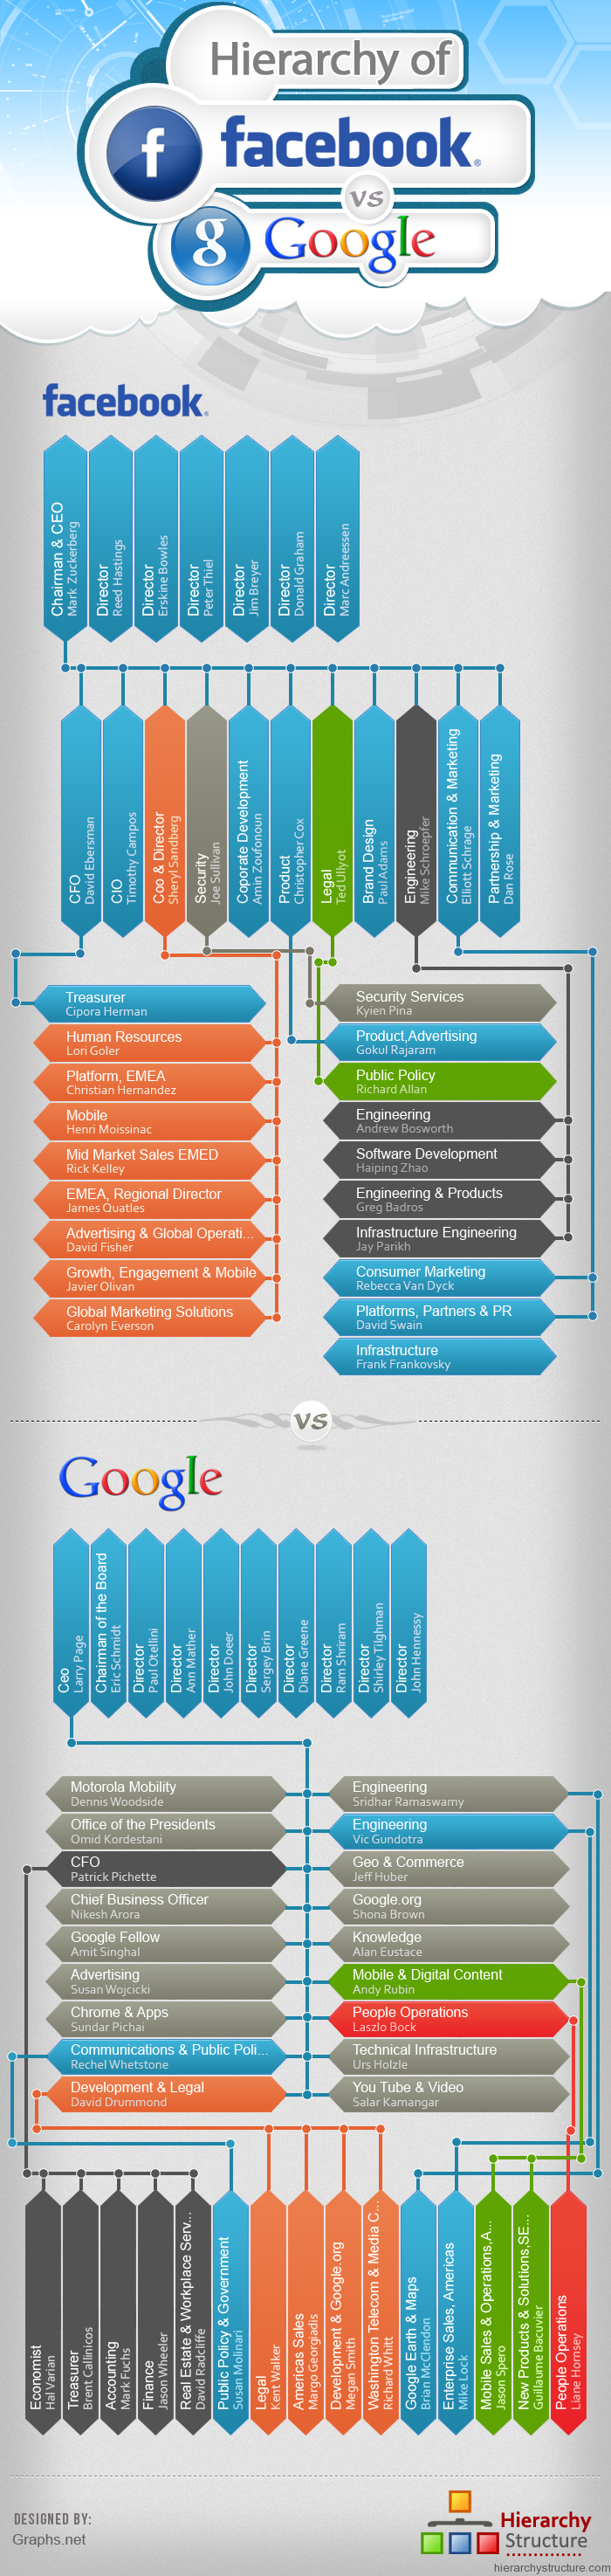 Hierarchy of Facebook vs Google (Infographic ...